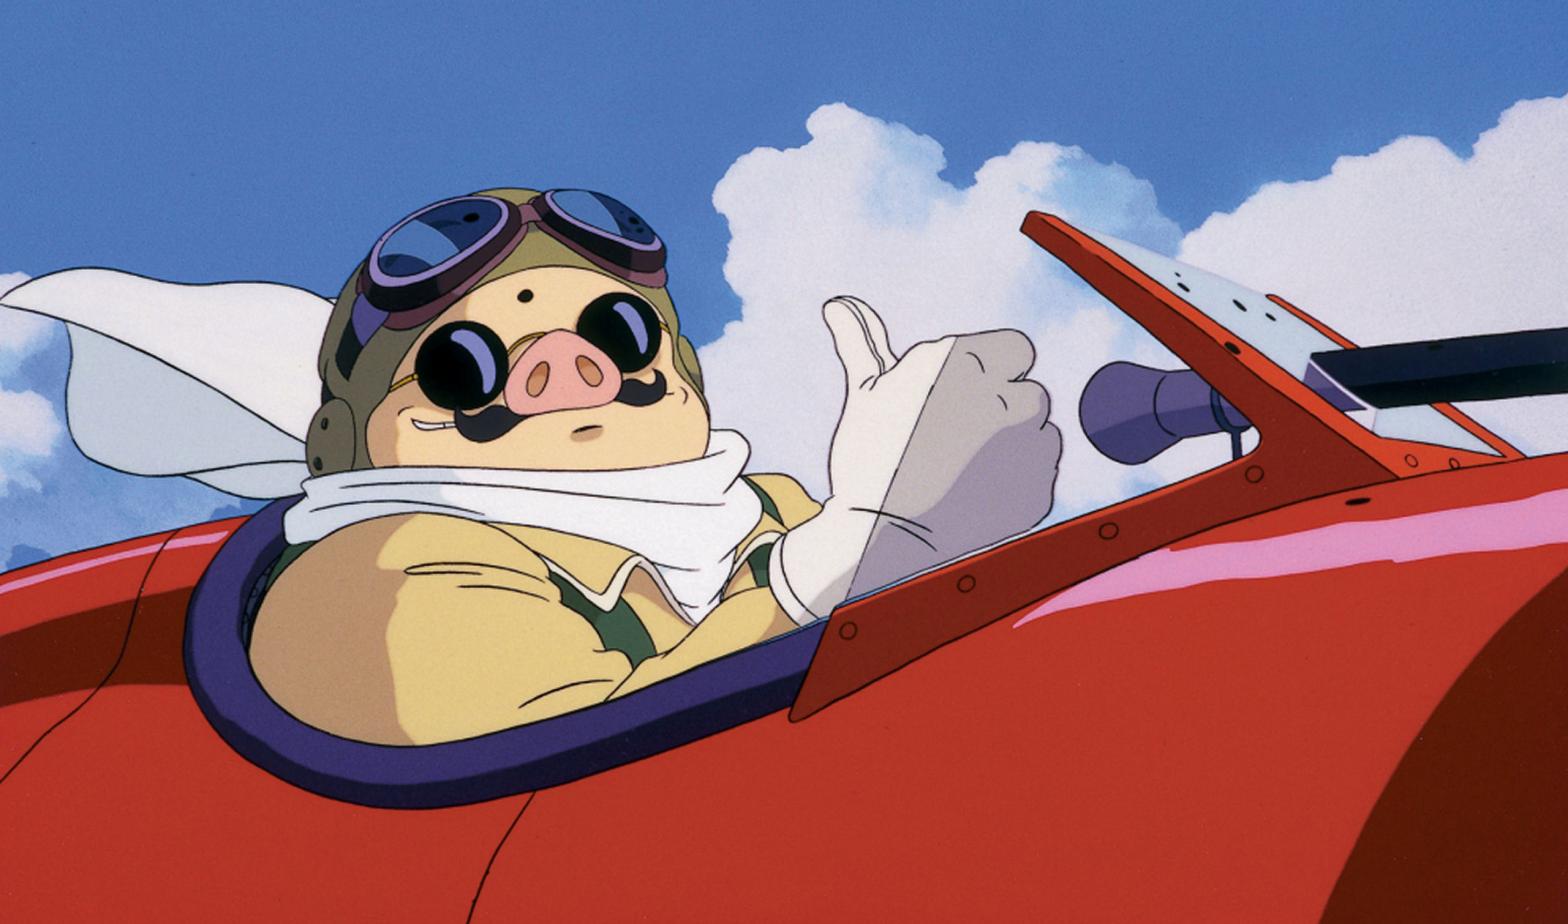 Most of all, he loves flying. (Image: Studio Ghibli)